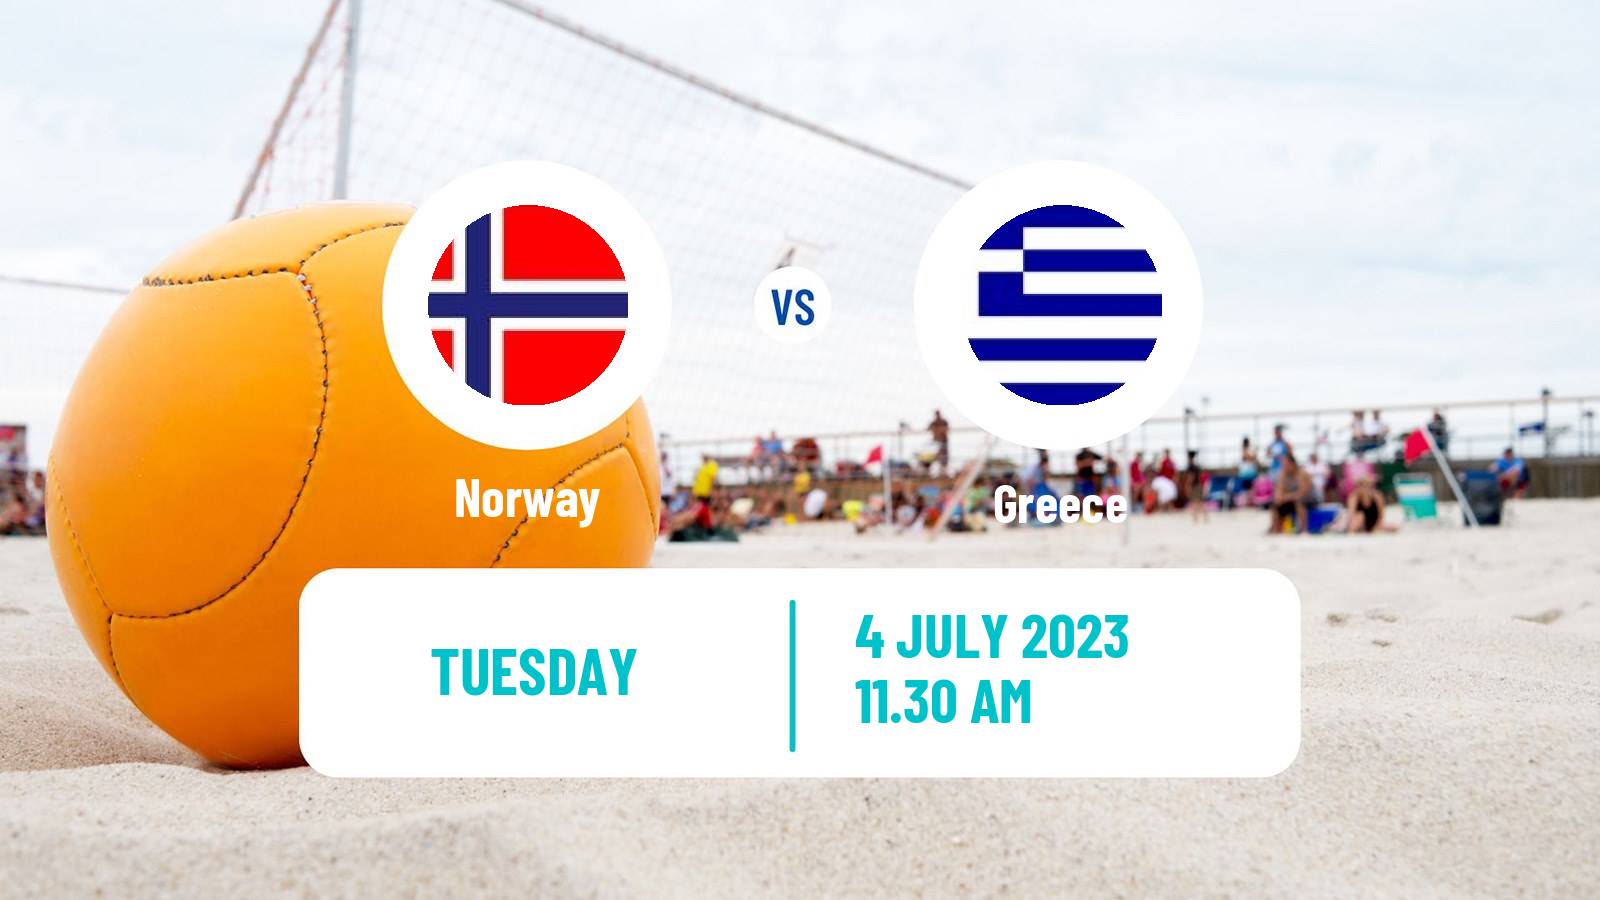 Beach soccer World Cup Norway - Greece